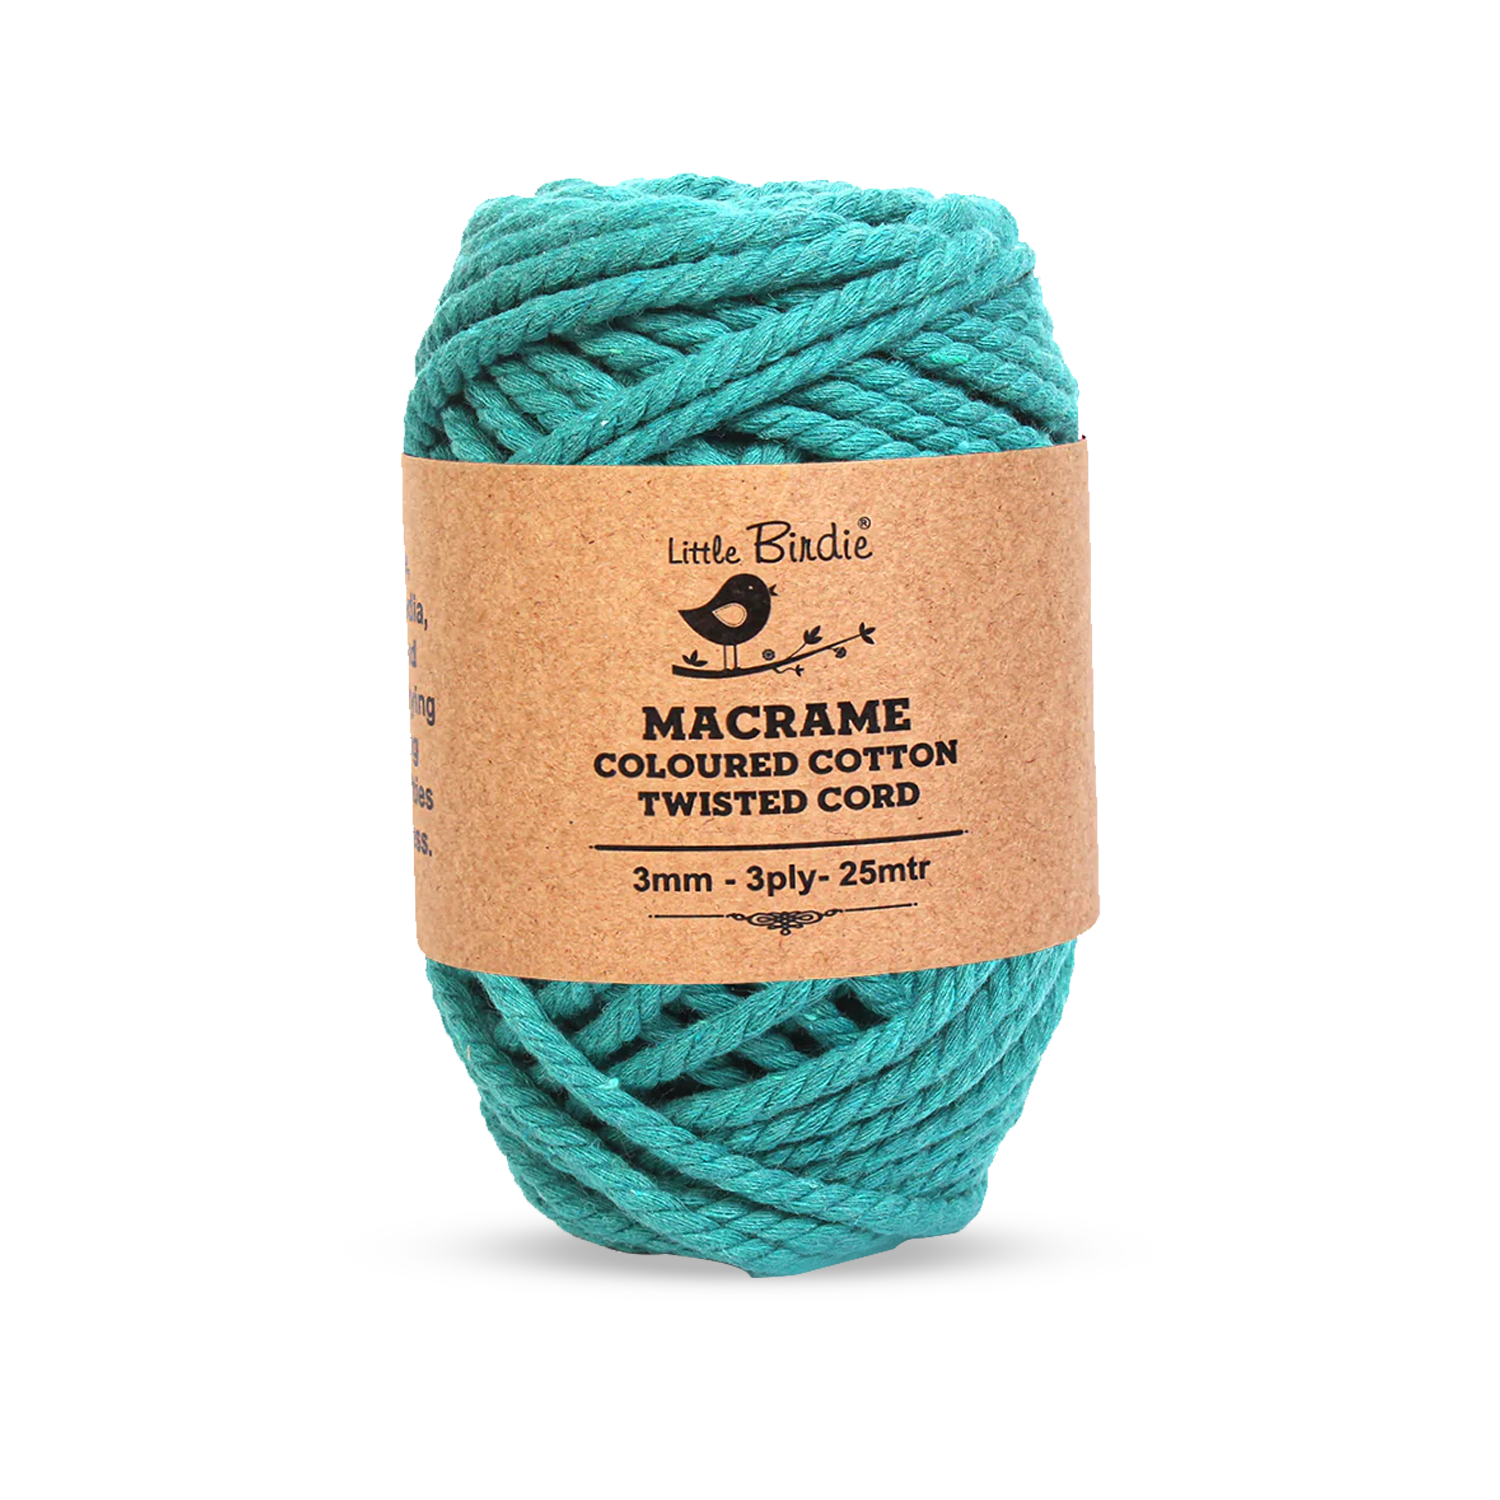 Macrame Cotton Twisted Cord - Teal Green 3mm 3Ply 25Mtr 1Roll